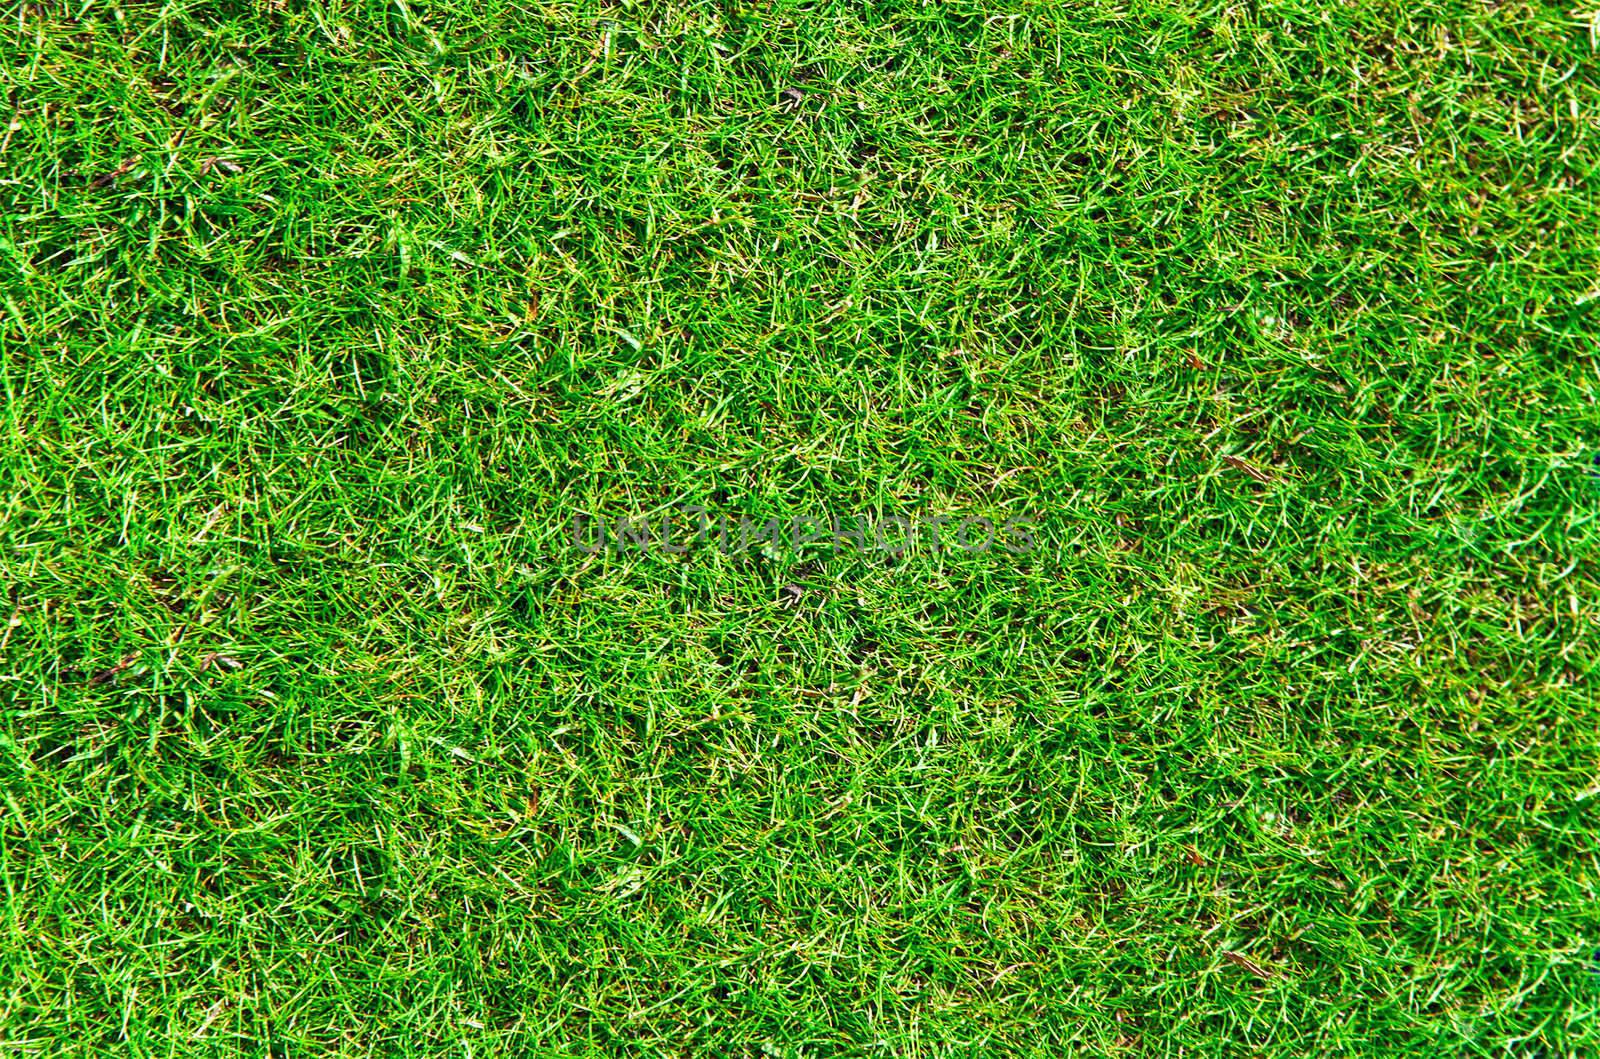 The real green grass background by majeczka